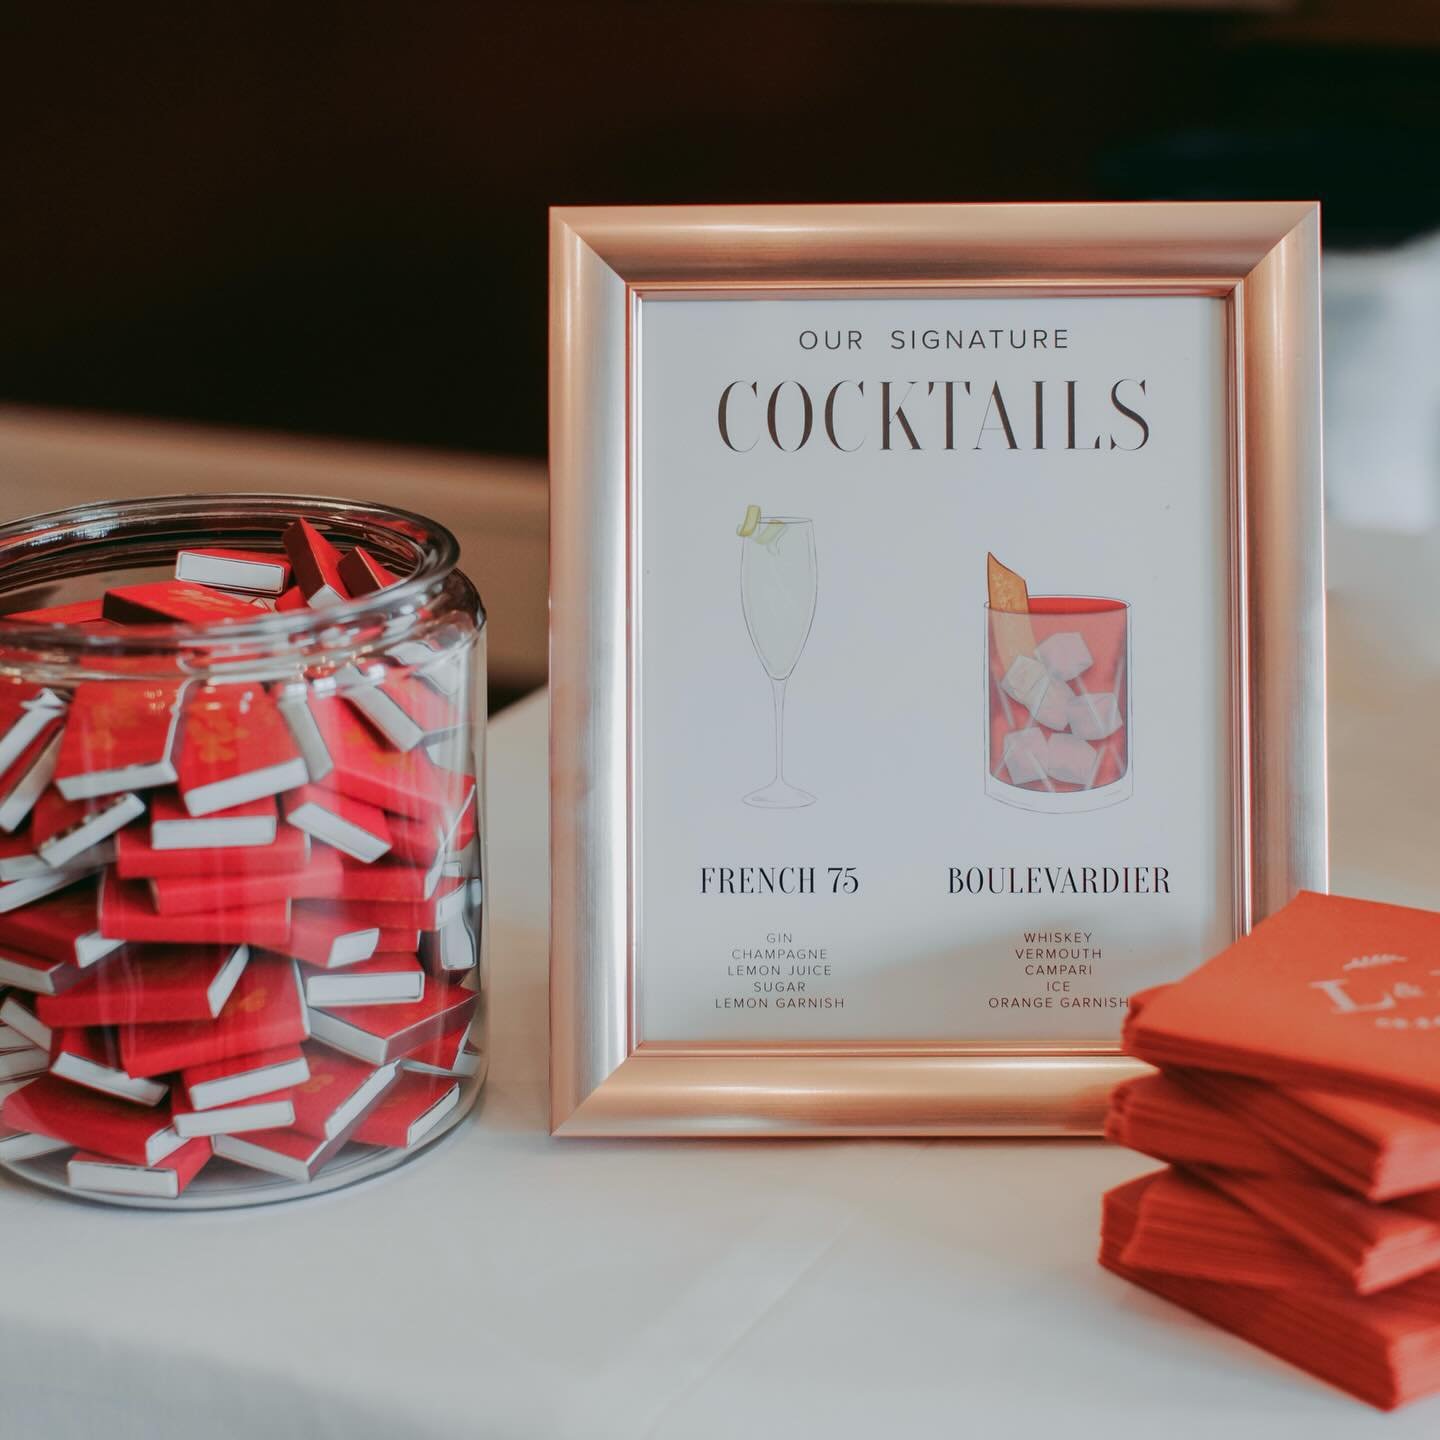 Cheers to a wedding day that&rsquo;s as one-of-a-kind as you are! 🥂

Elevate your celebration with personalized cocktail signs! 

From classic to quirky, let your signature drinks shine with custom signs that reflect your unique style and love story